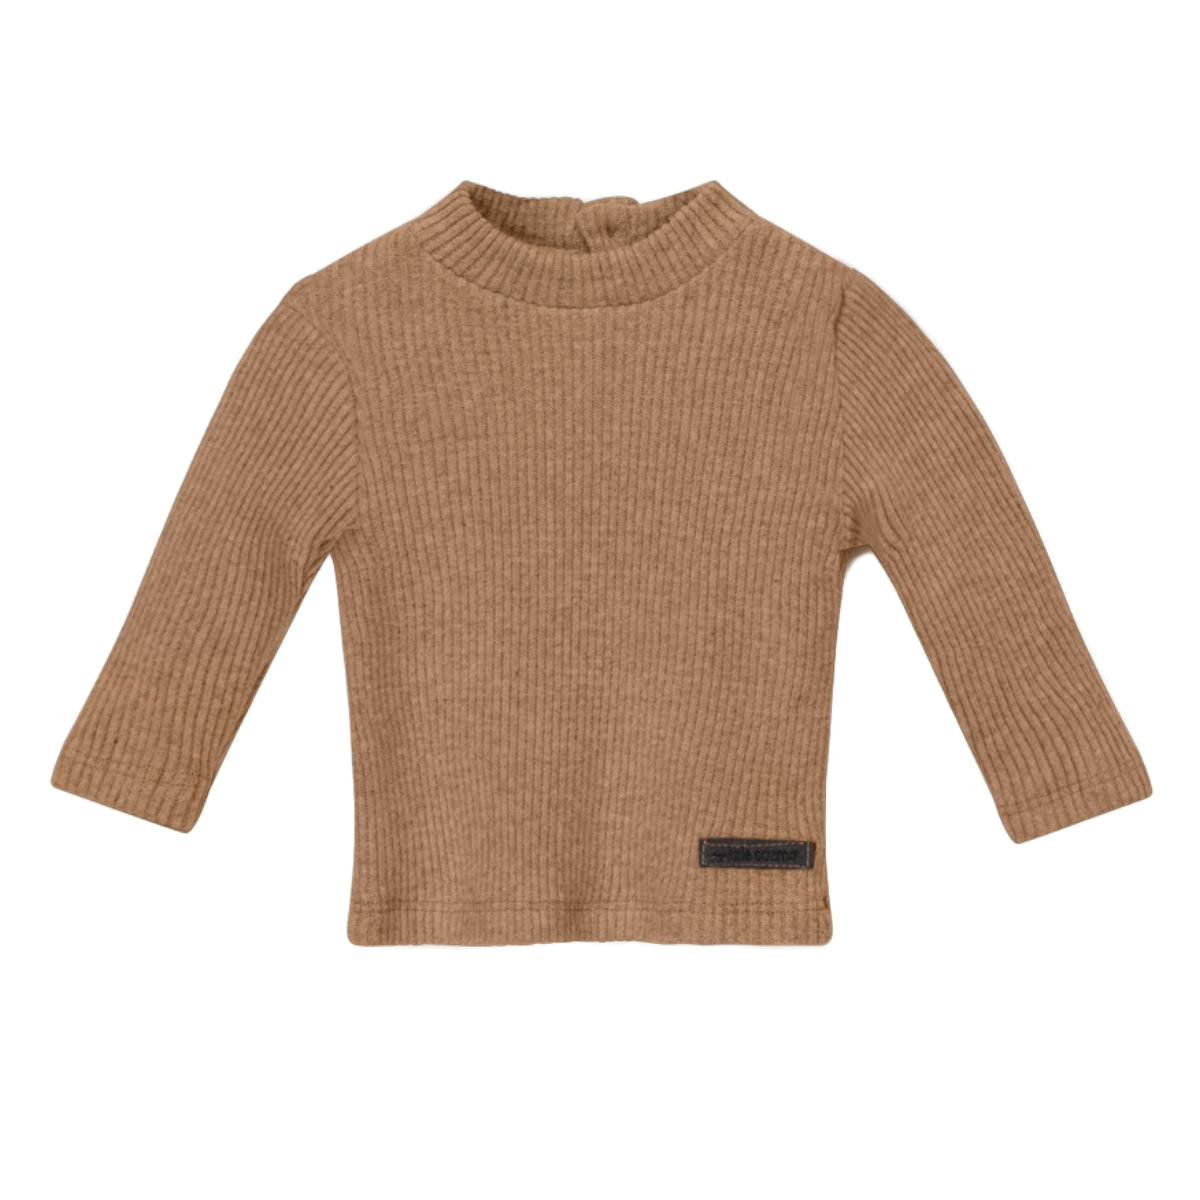 My Little Cozmo Organic rib baby sweater - Camel | Dream out Loud